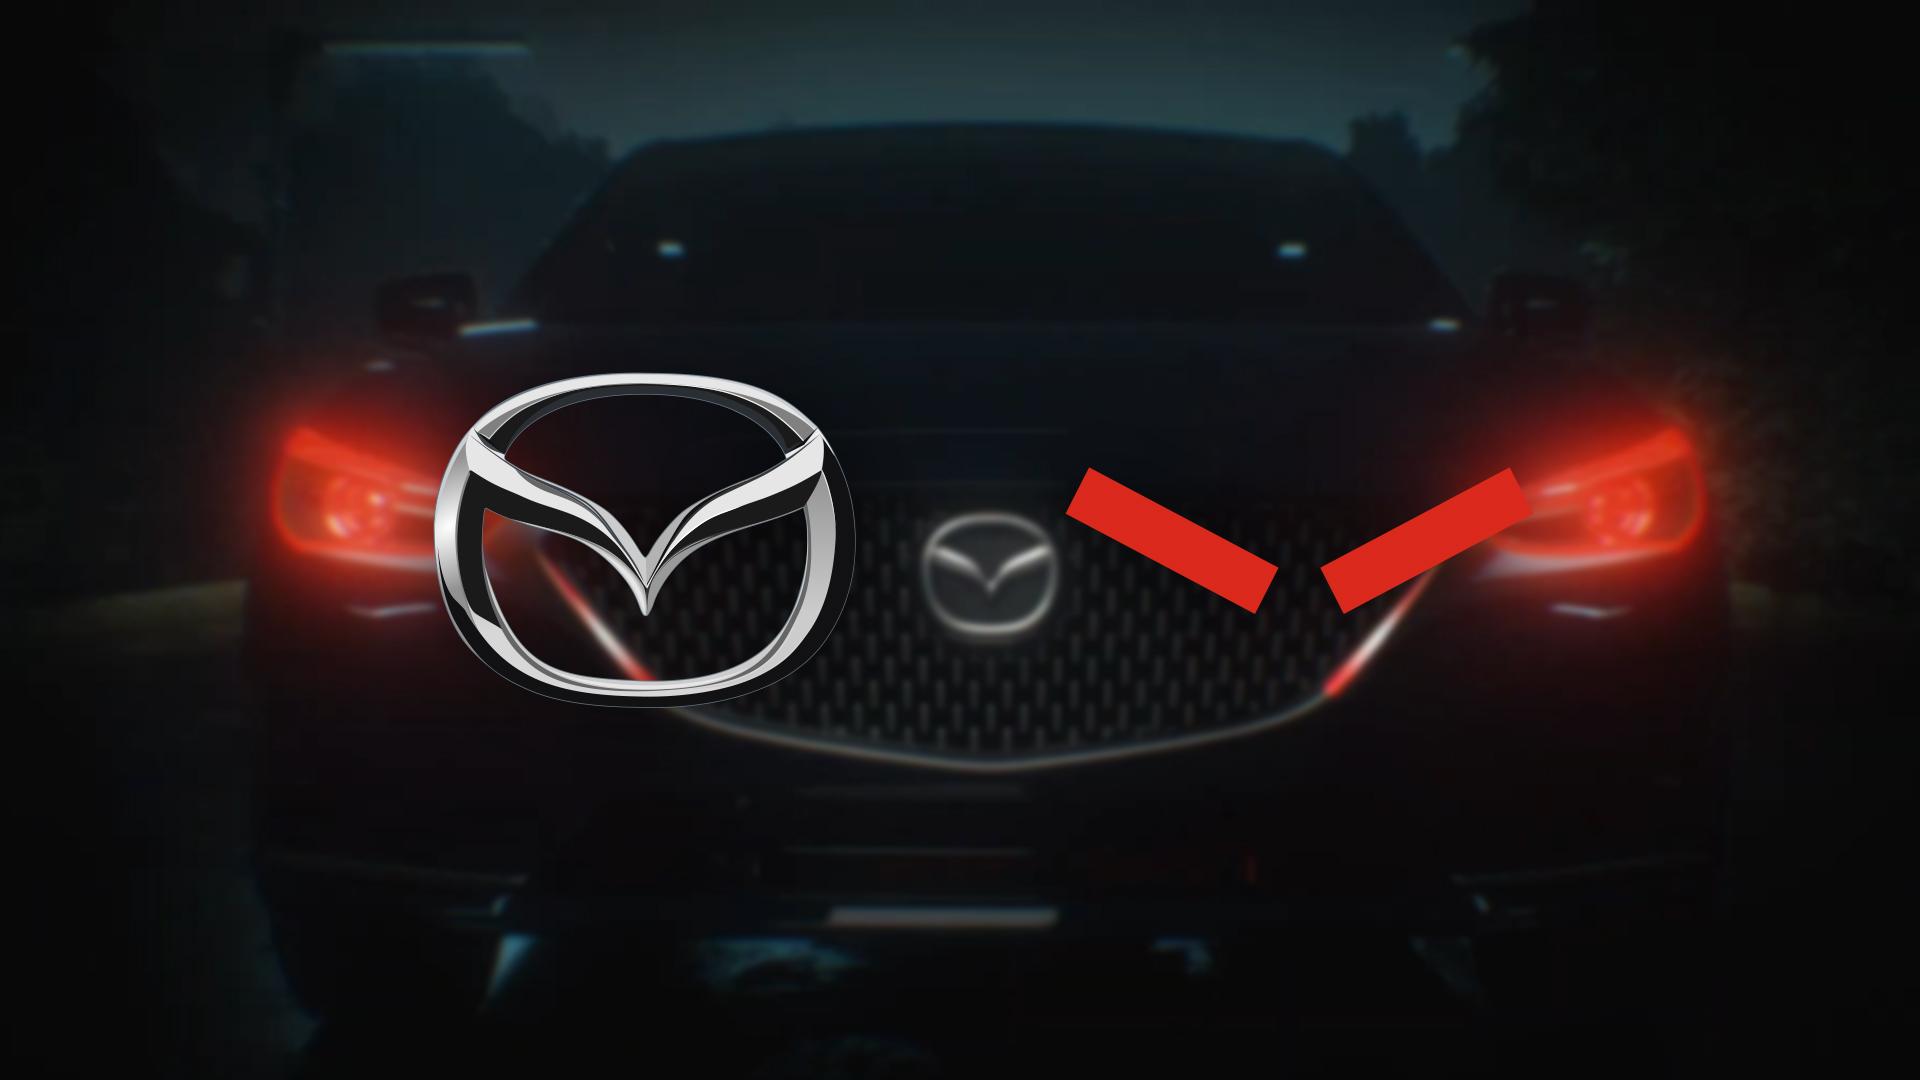 HellRaisers partners with Mazda